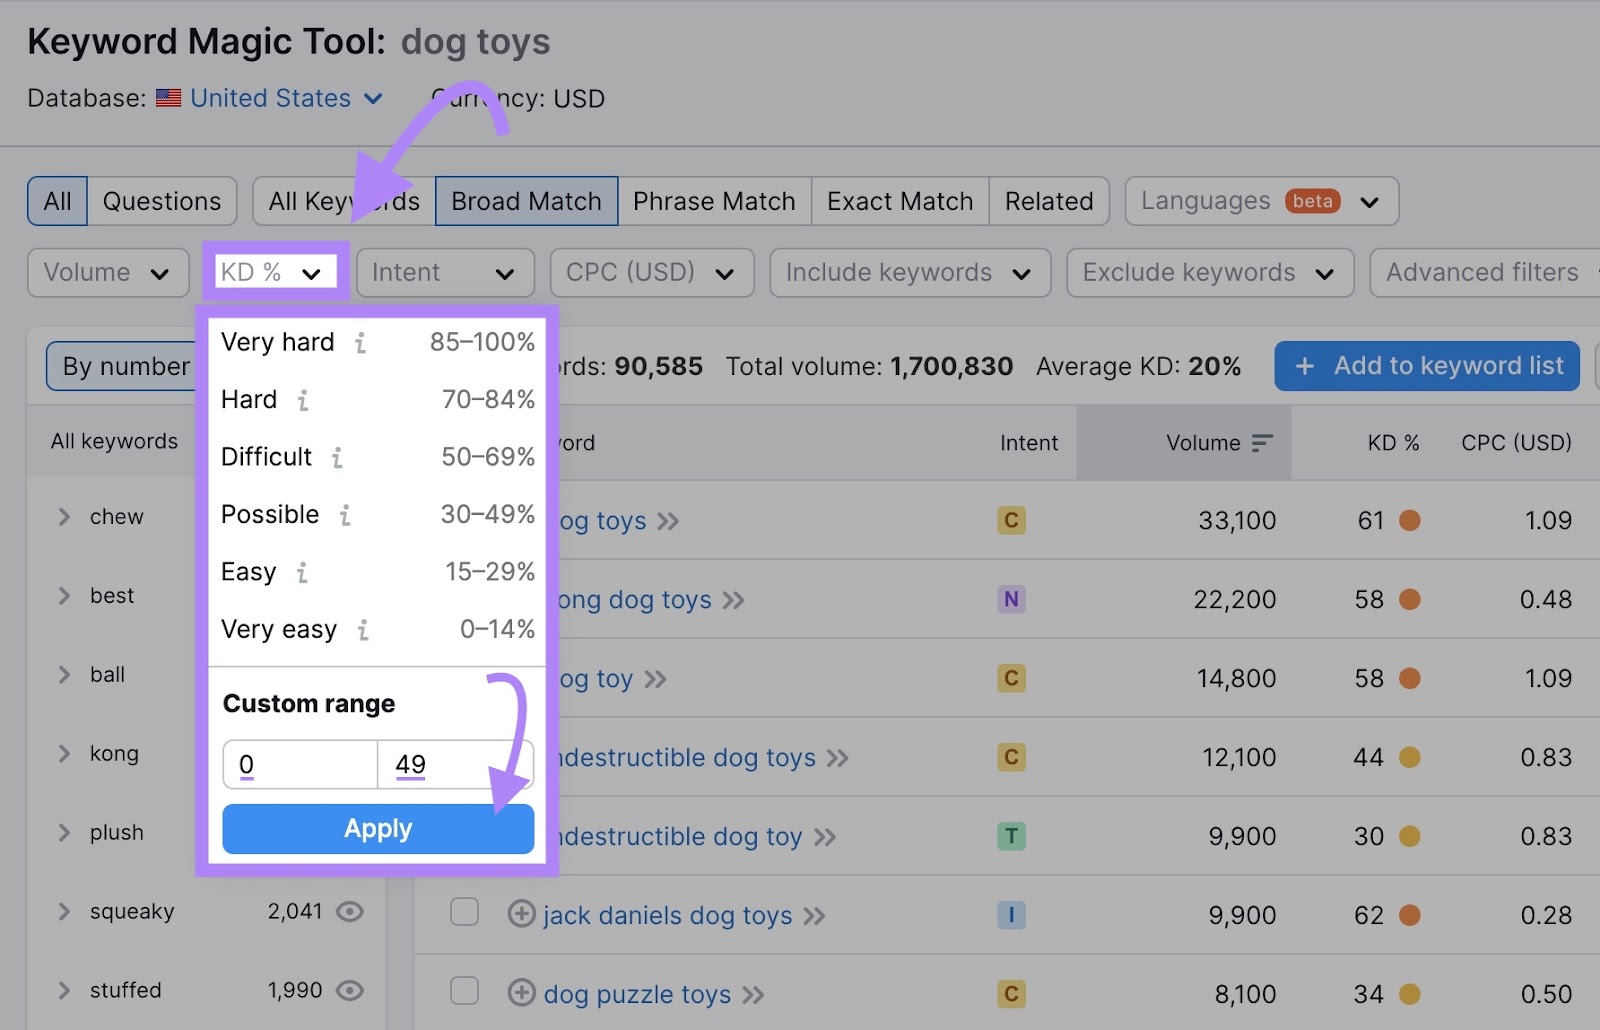 Keyword Magic Tool results for “dog toys” showing a custom range of 0-49 entered in the keyword difficulty filter box.